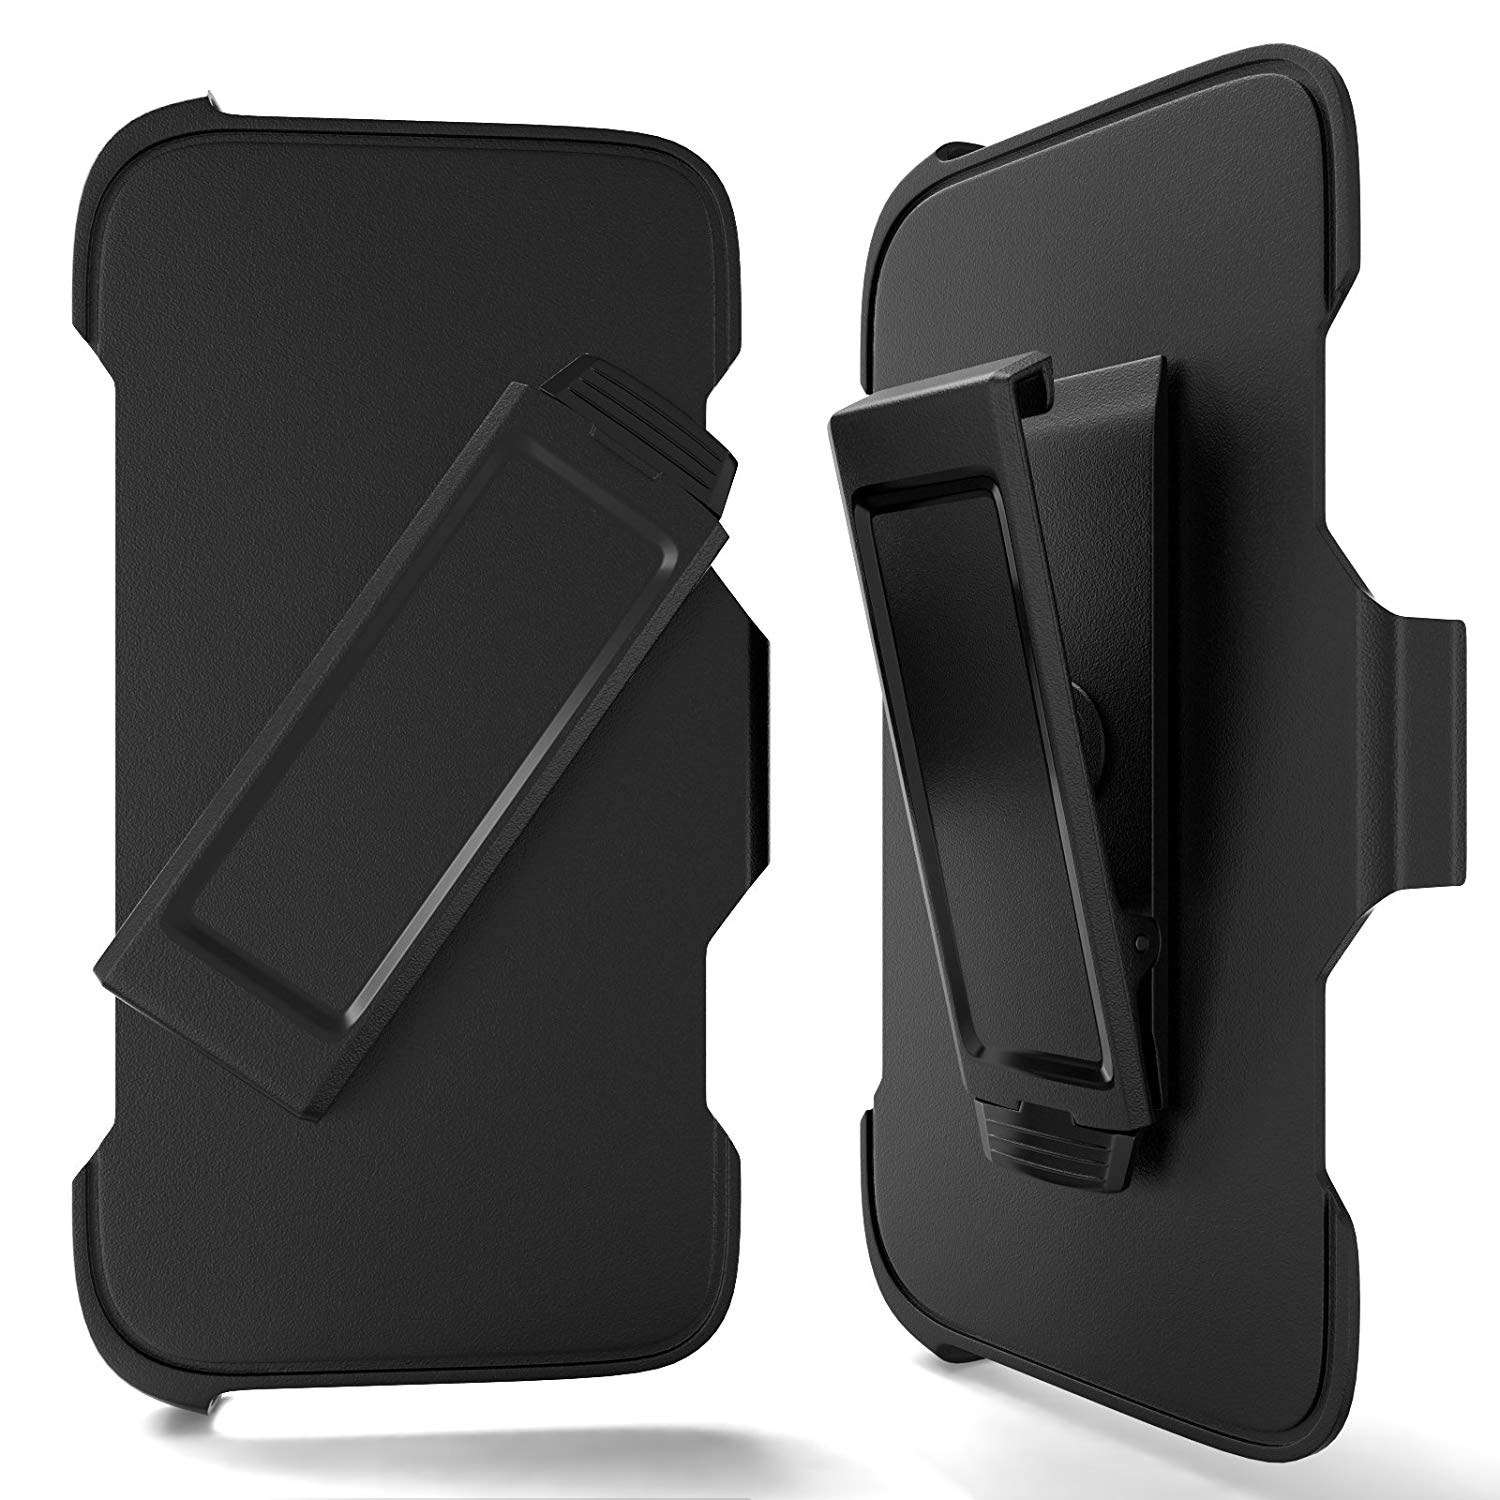 Heavy Duty Armor Robot Case Clip Only for Samsung Galaxy S20 6.2 inch (Black)